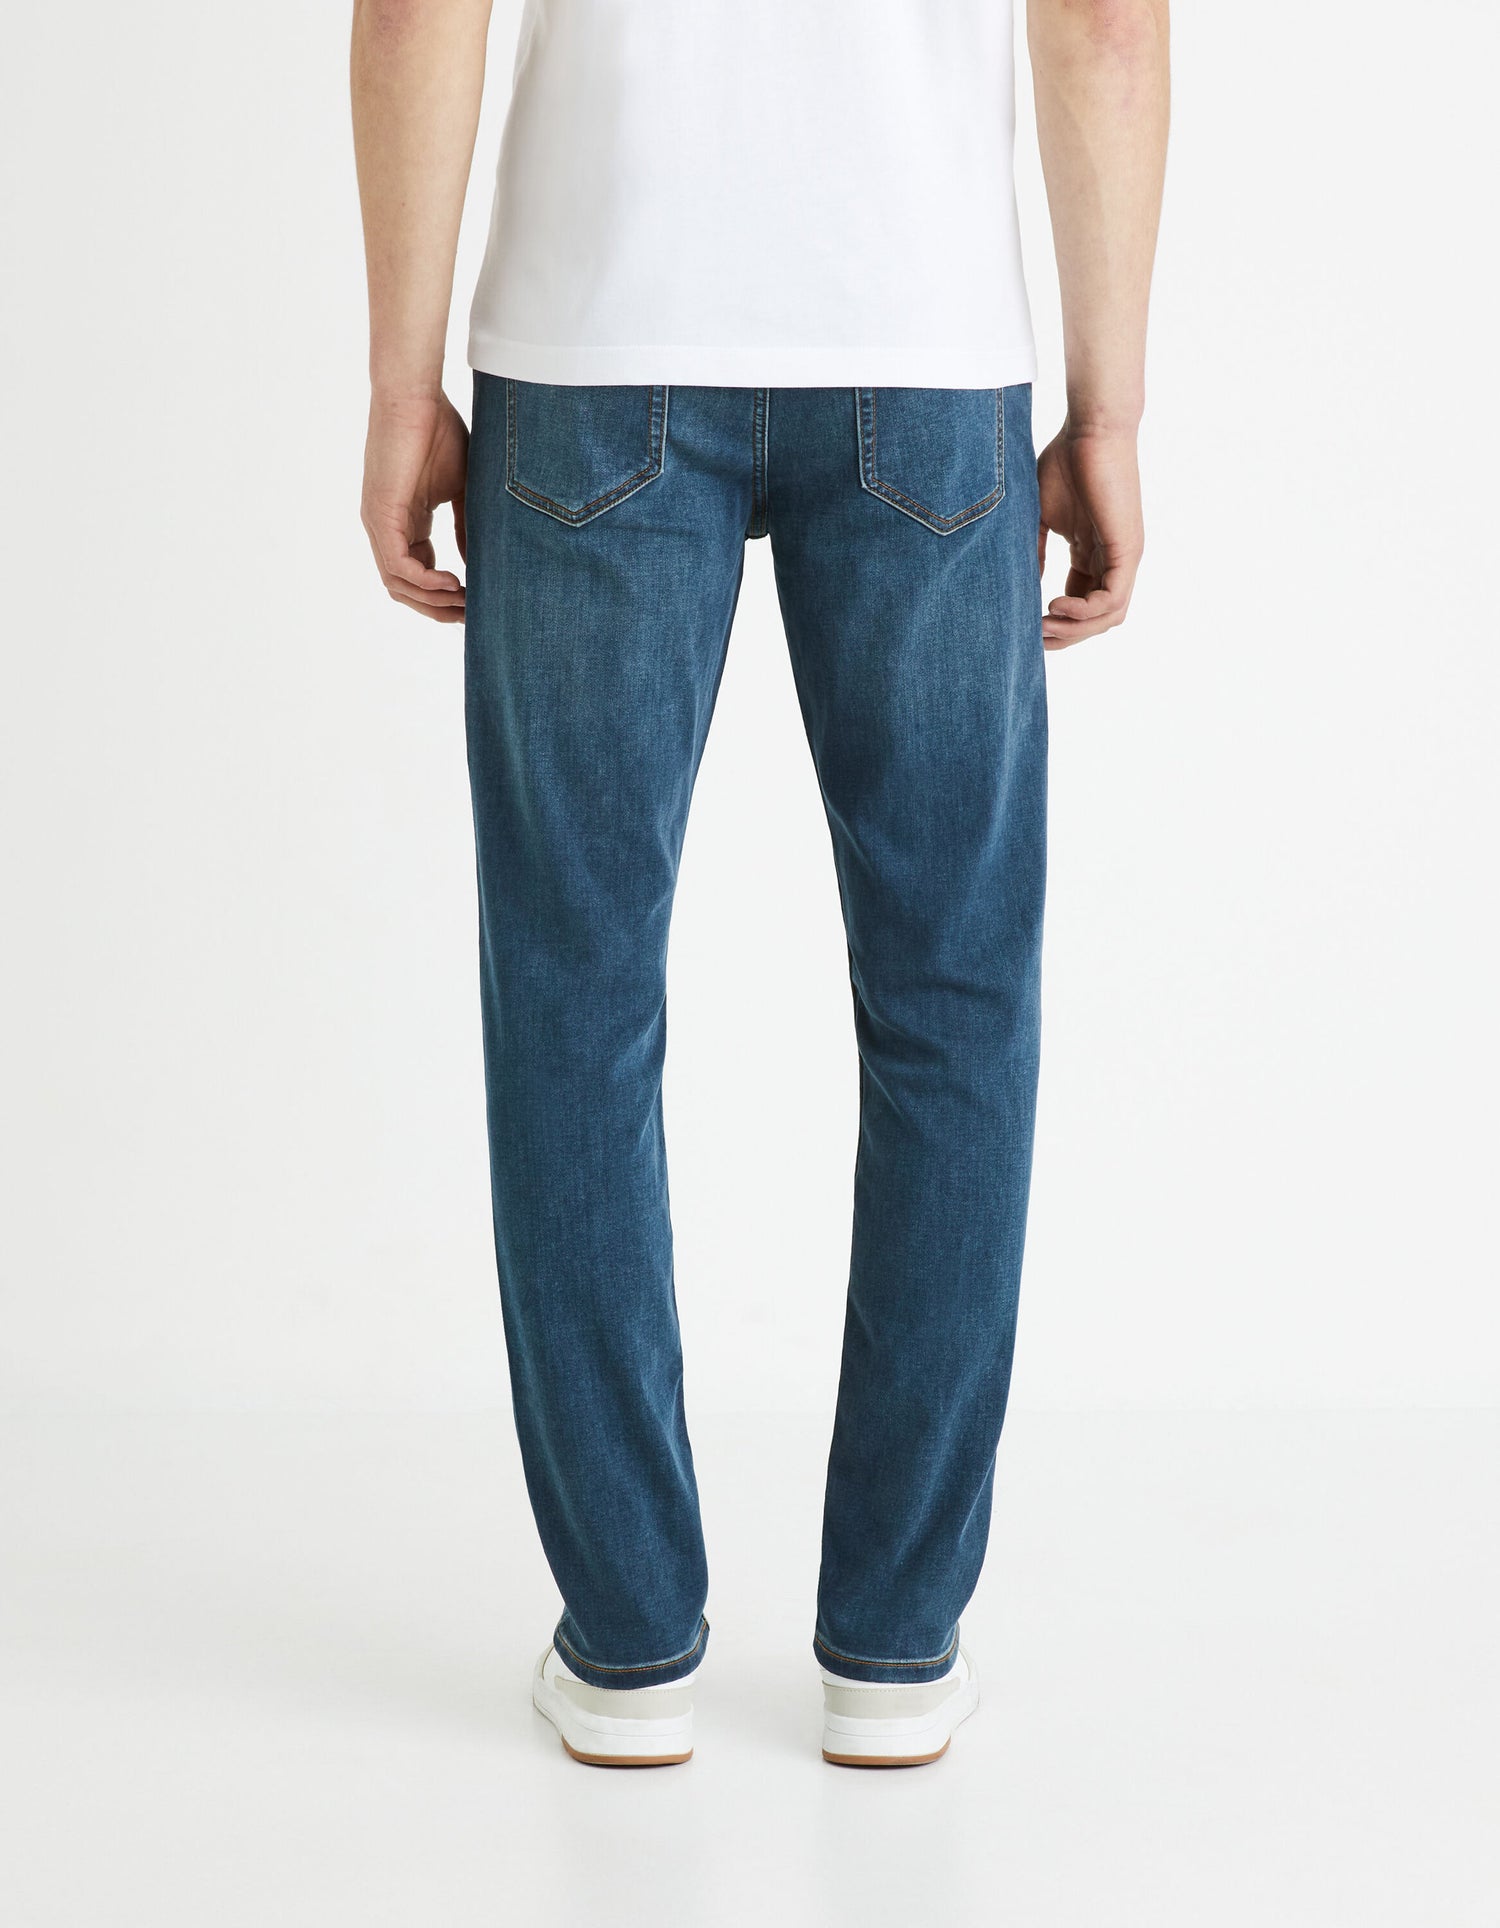 C15 Straight Jeans 3 Lengths Stretch - Double Stone_FOKLO15_DOUBLE STONE_04